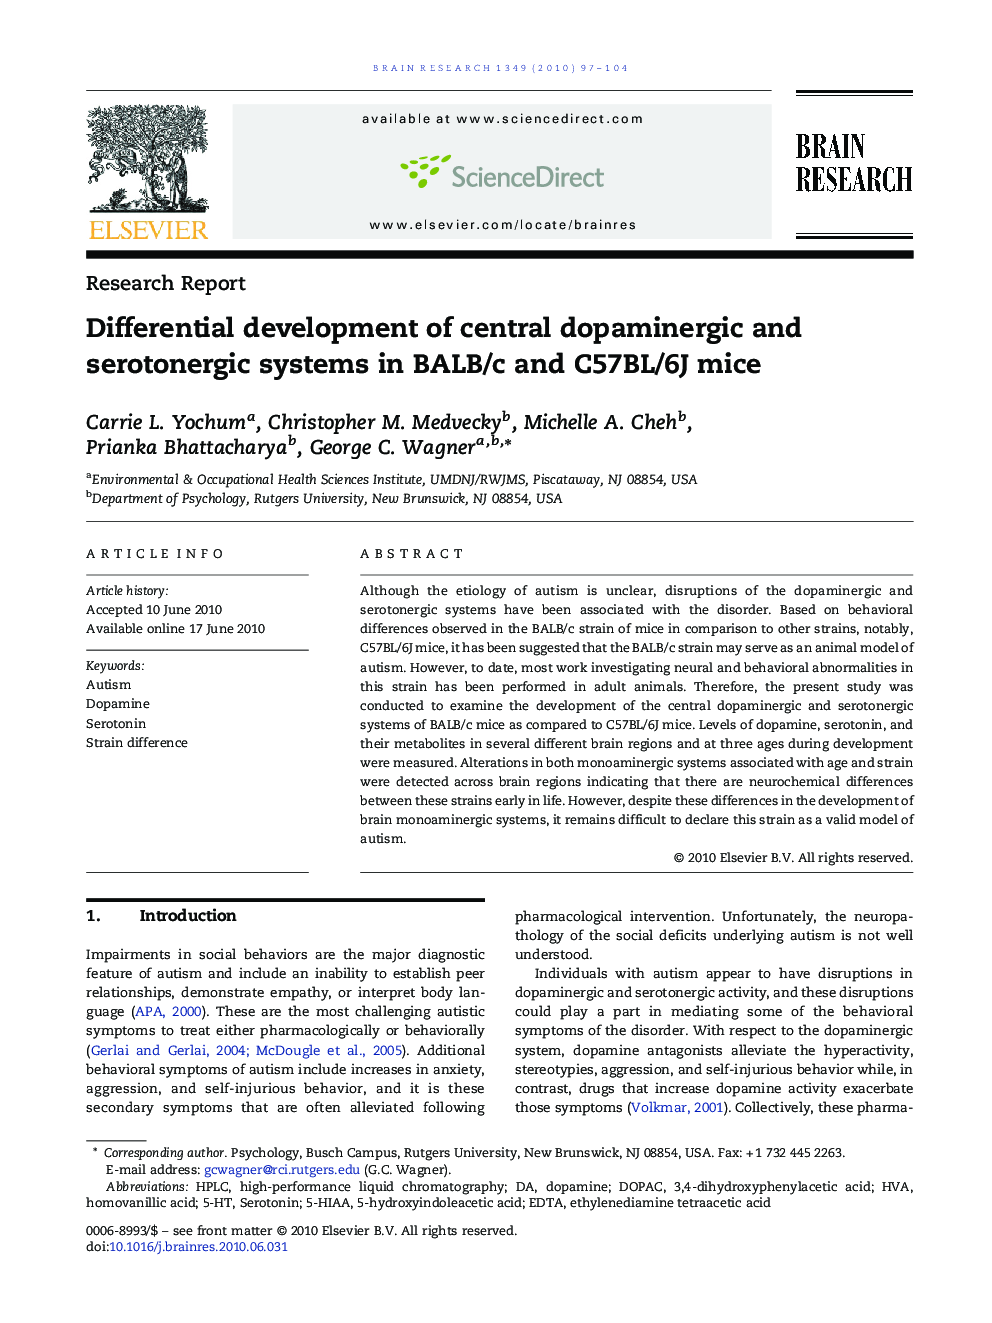 Differential development of central dopaminergic and serotonergic systems in BALB/c and C57BL/6J mice